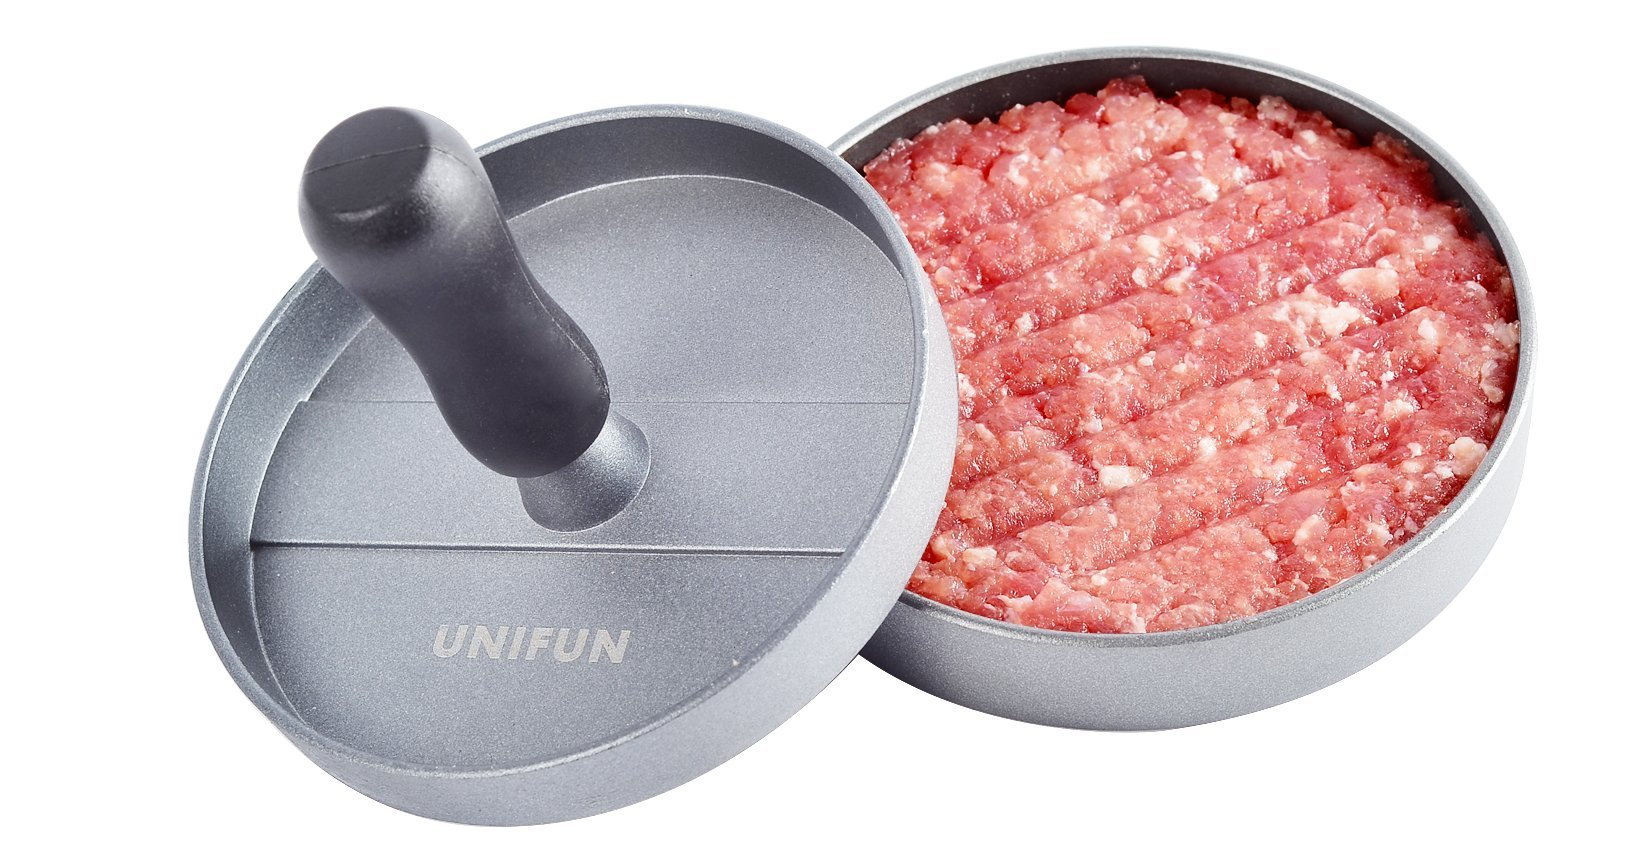 Unifun Burger Press Only $8.98 on Amazon! Get Ready For Grilling Season!